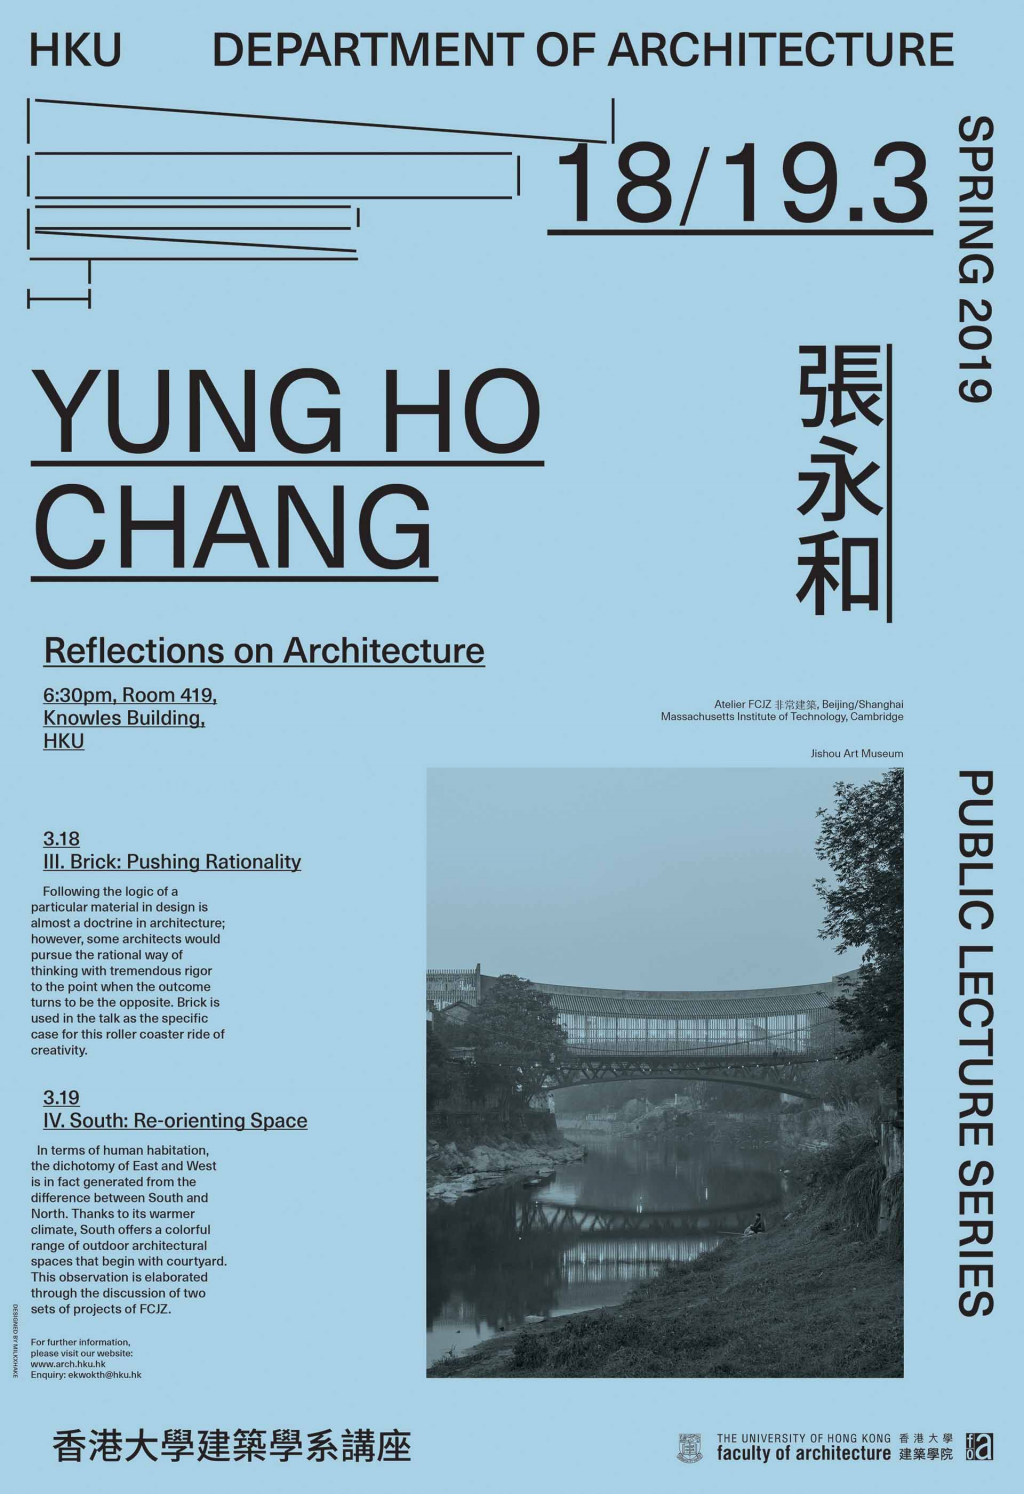 Professor Yung Ho Chang Public Lecture Series - III. Brick: Pushing Rationality & IV. South: Re-orienting Space (18/19 March)